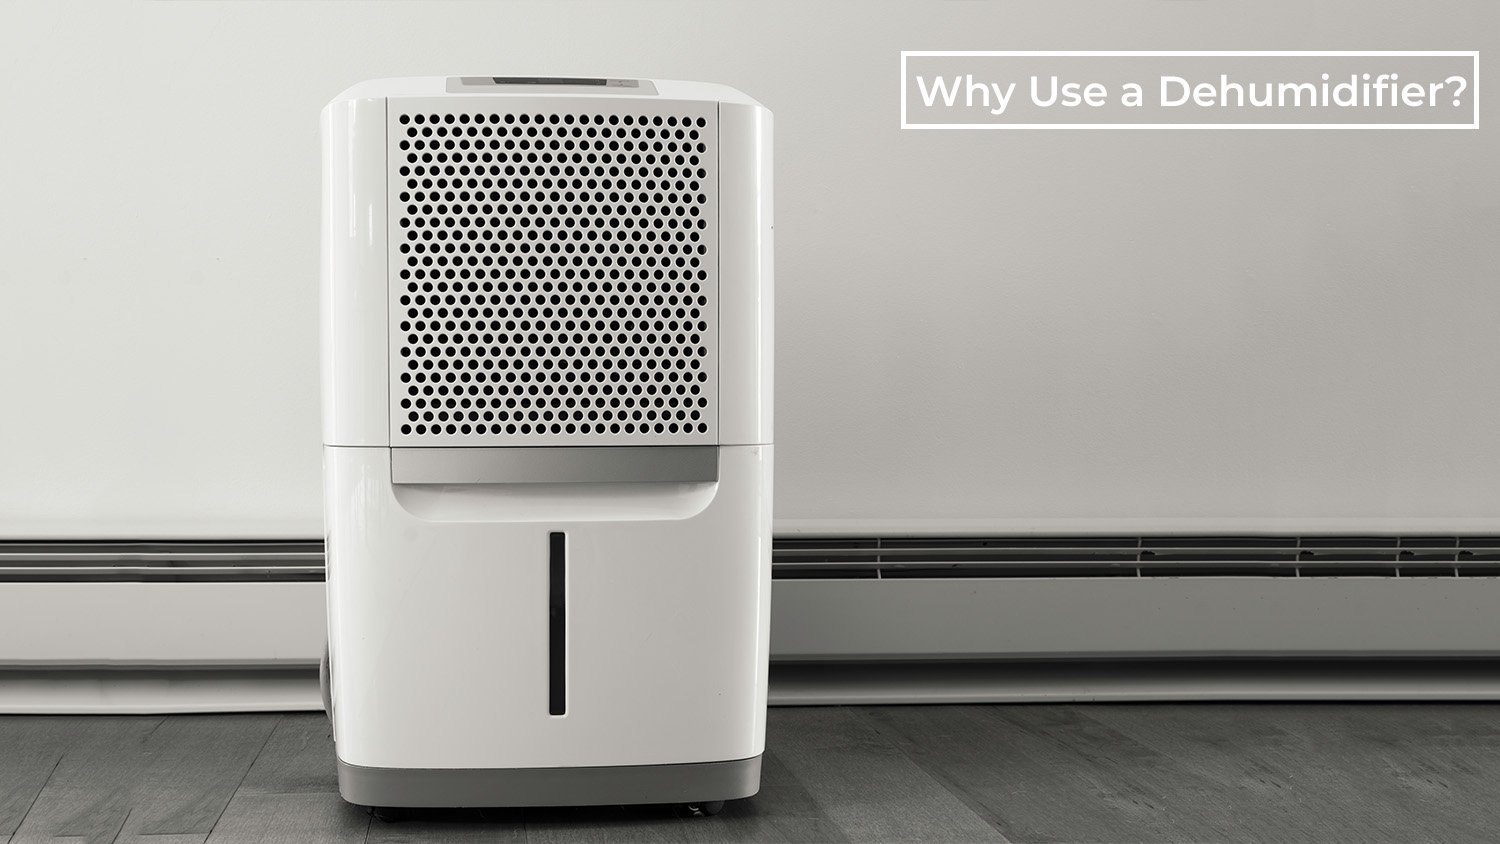 Why Use a Dehumidifier? Health, Comfort, and Savings Explained